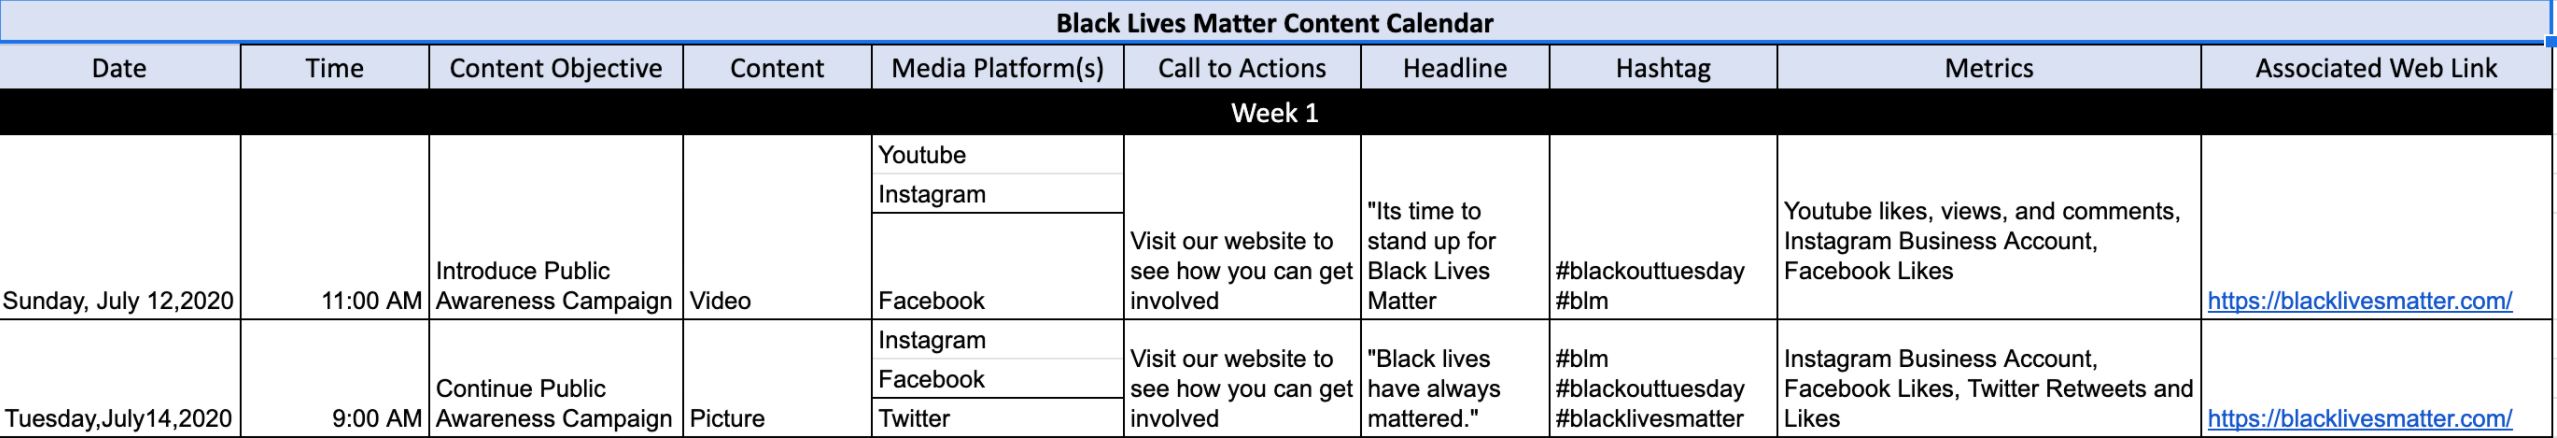 Excel grid example of a content calendar for Black Lives Matter.